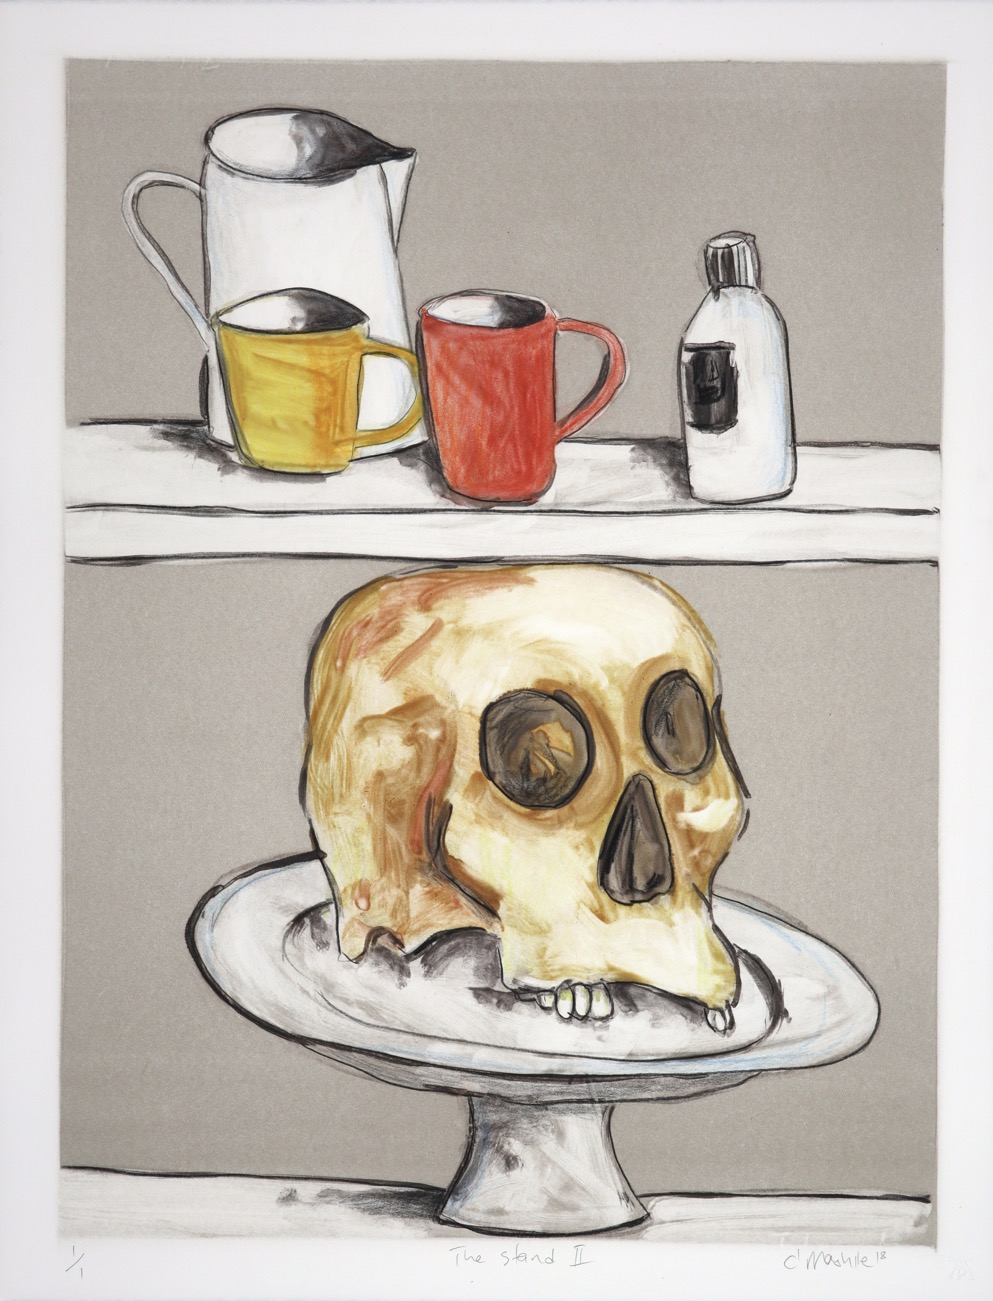 Two kitchen shelves holding cups, jar bottle and on bottom shelf cake stand with human skull